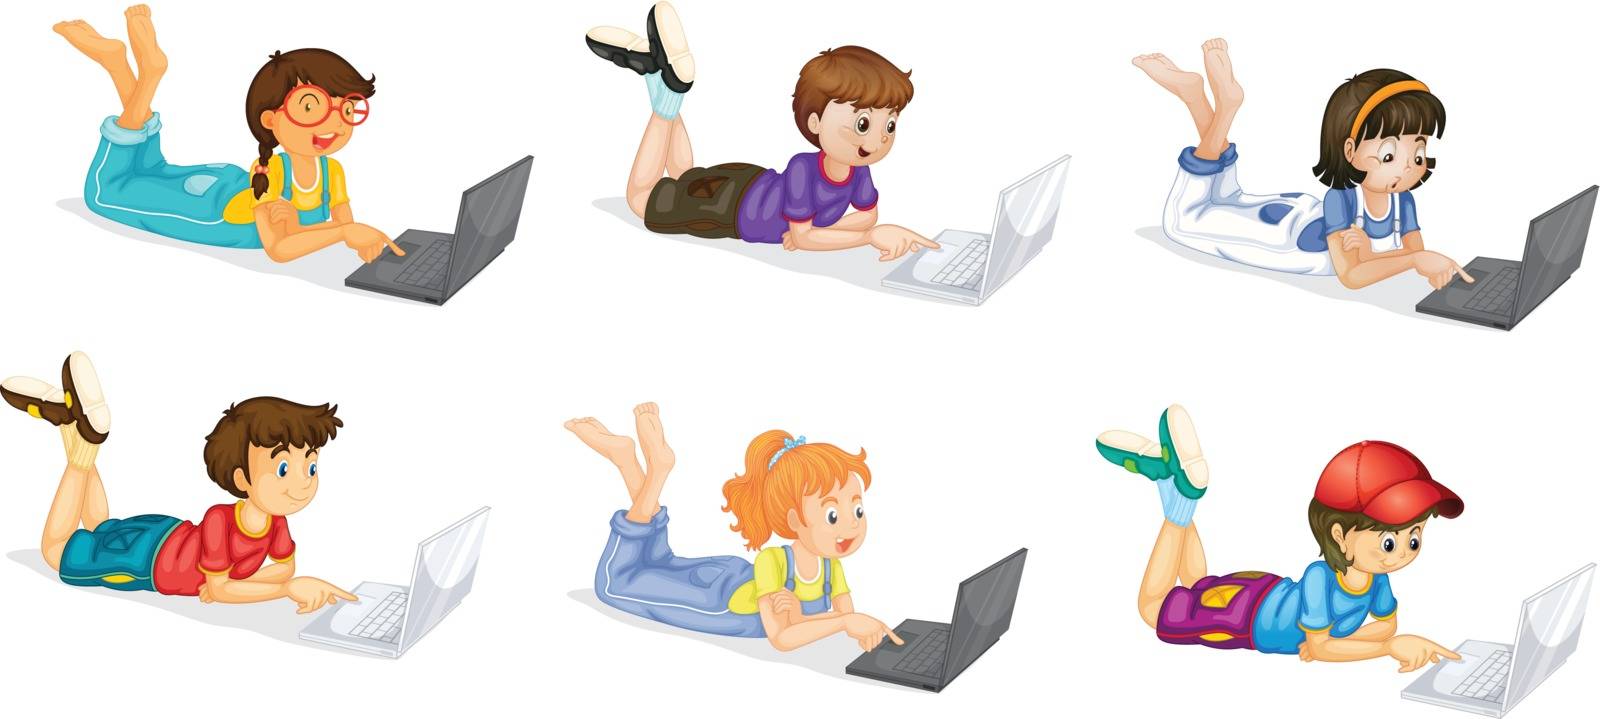 Laptops and Kids by iimages